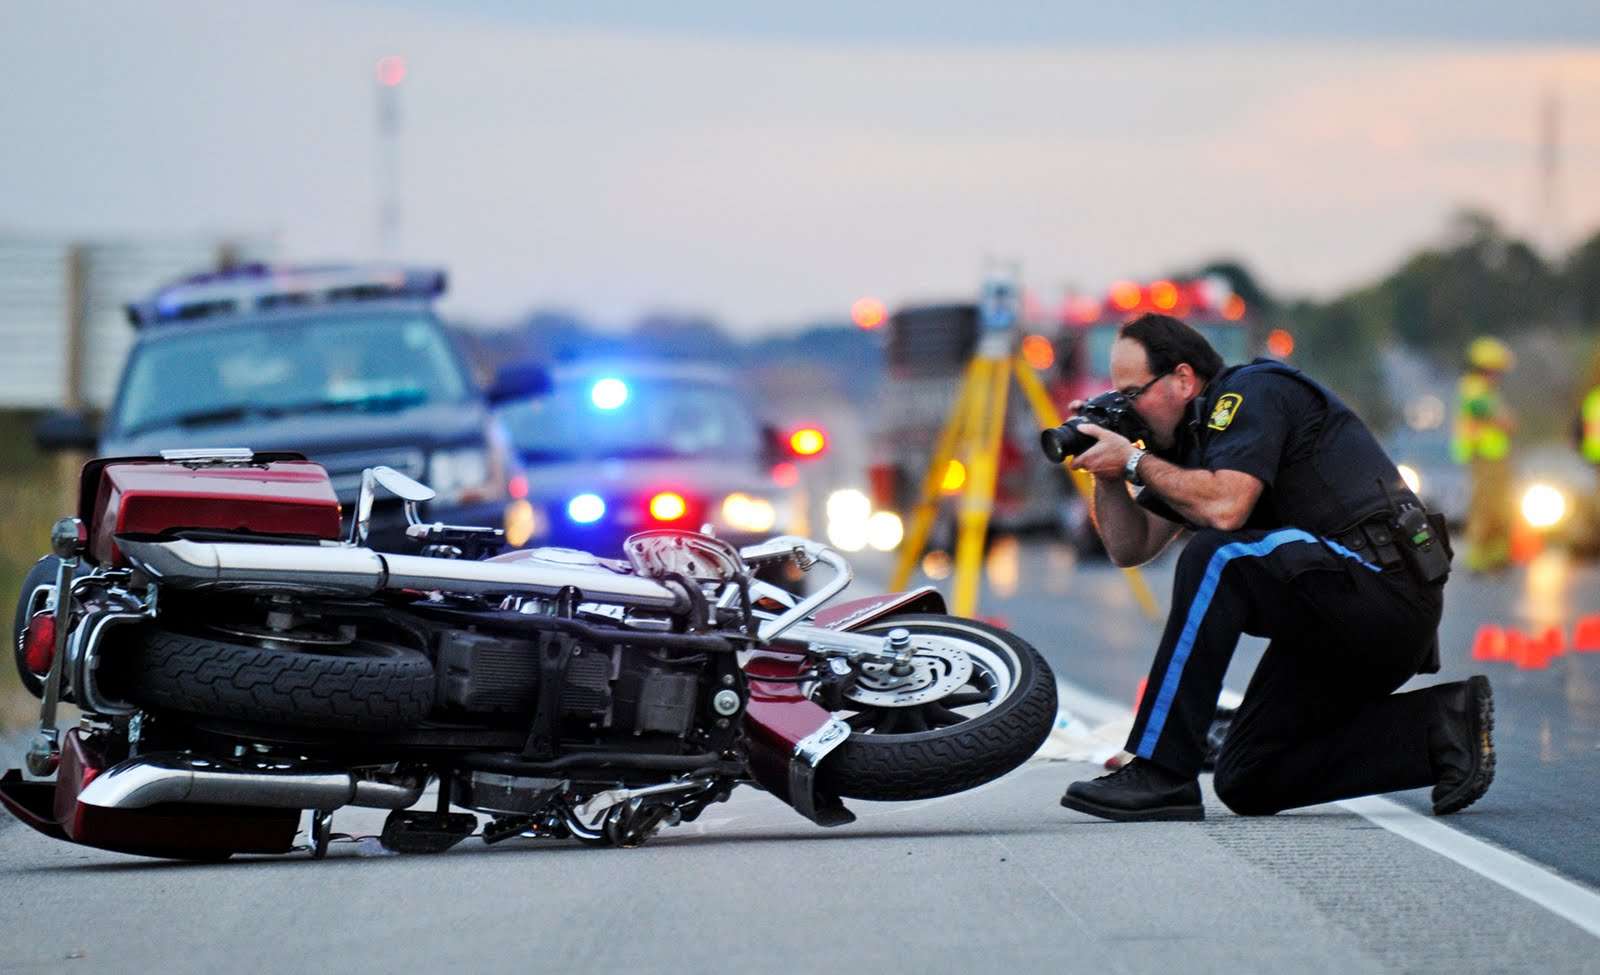 Motorcycle Accident Lawyer Milwaukee: Protecting Your Rights and Seeking Justice